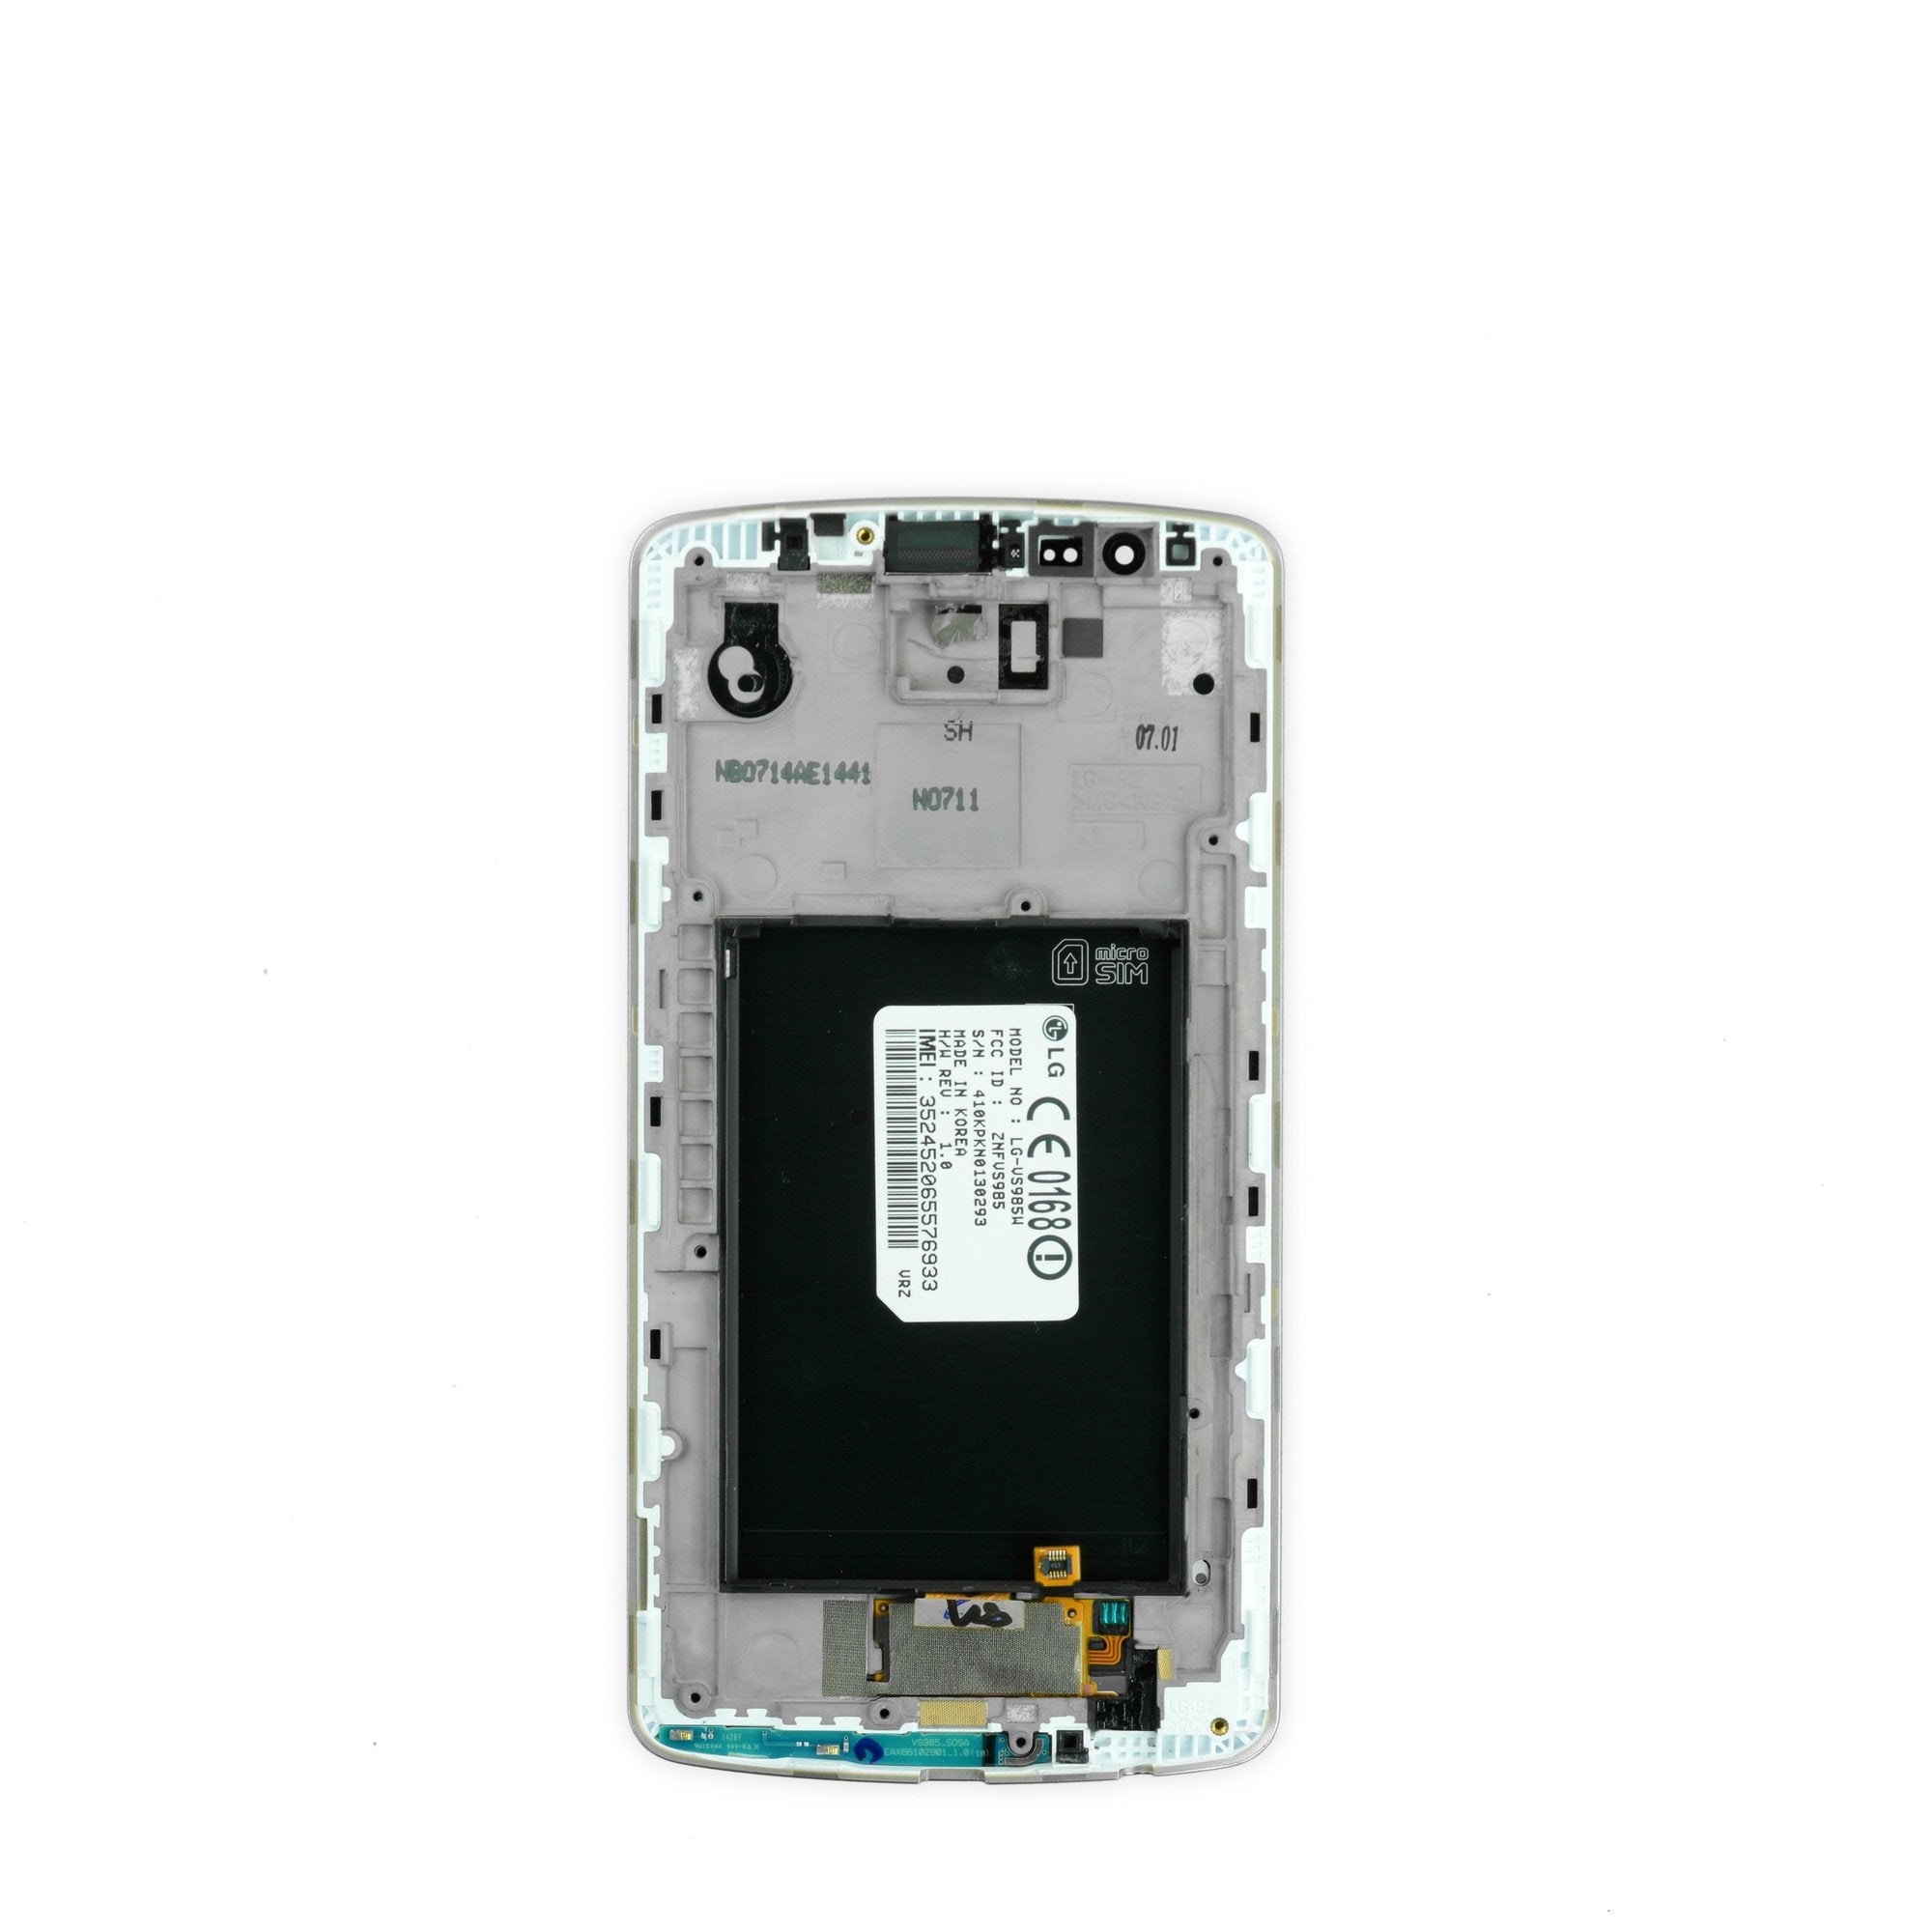 LG G3 (Verizon) Screen Assembly Used, A-Stock